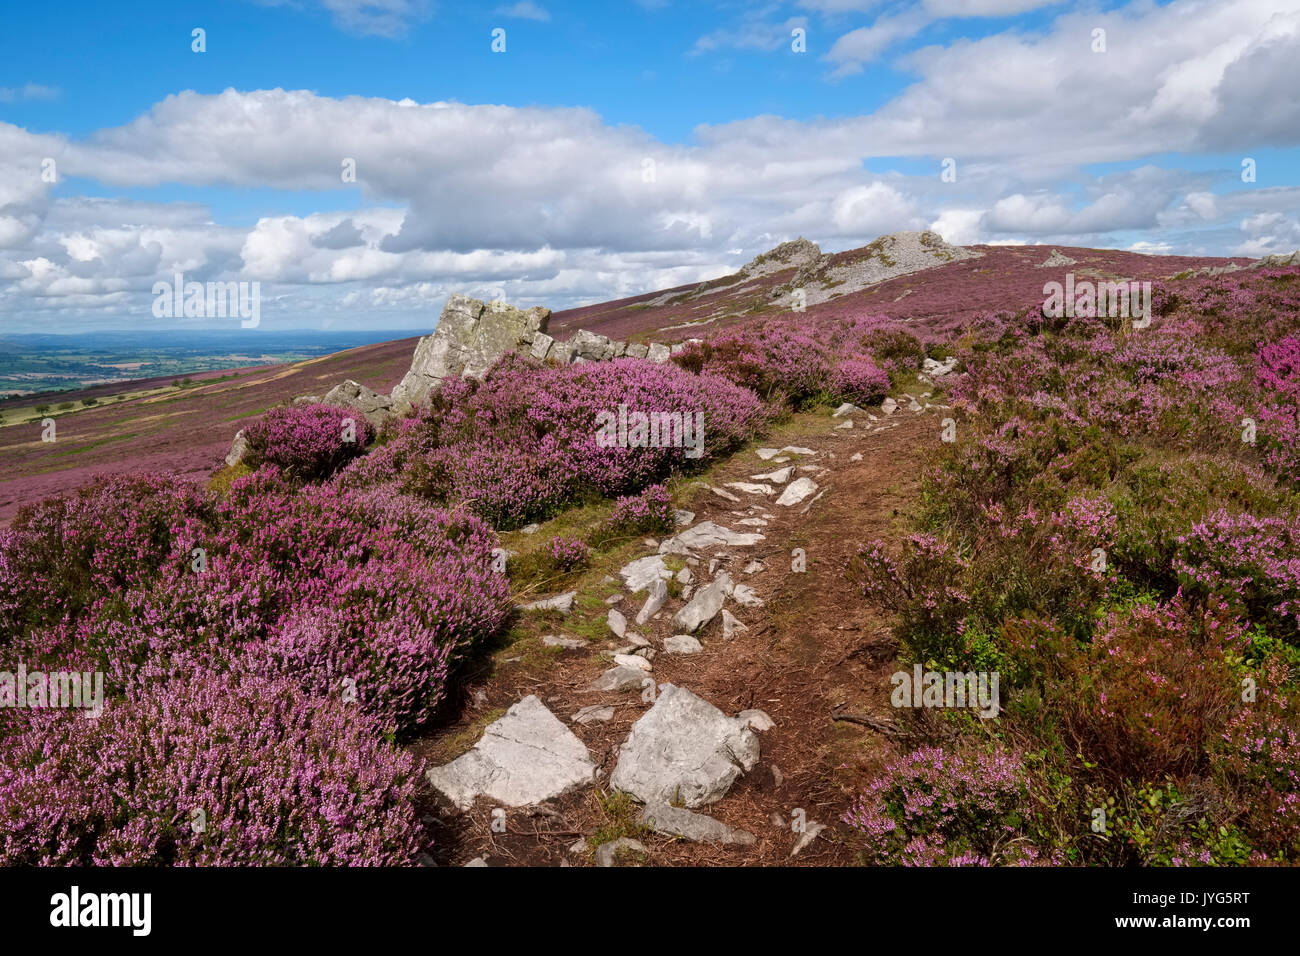 A rocky path through purple heather on the Stiperstones, Shropshire, England, UK Stock Photo